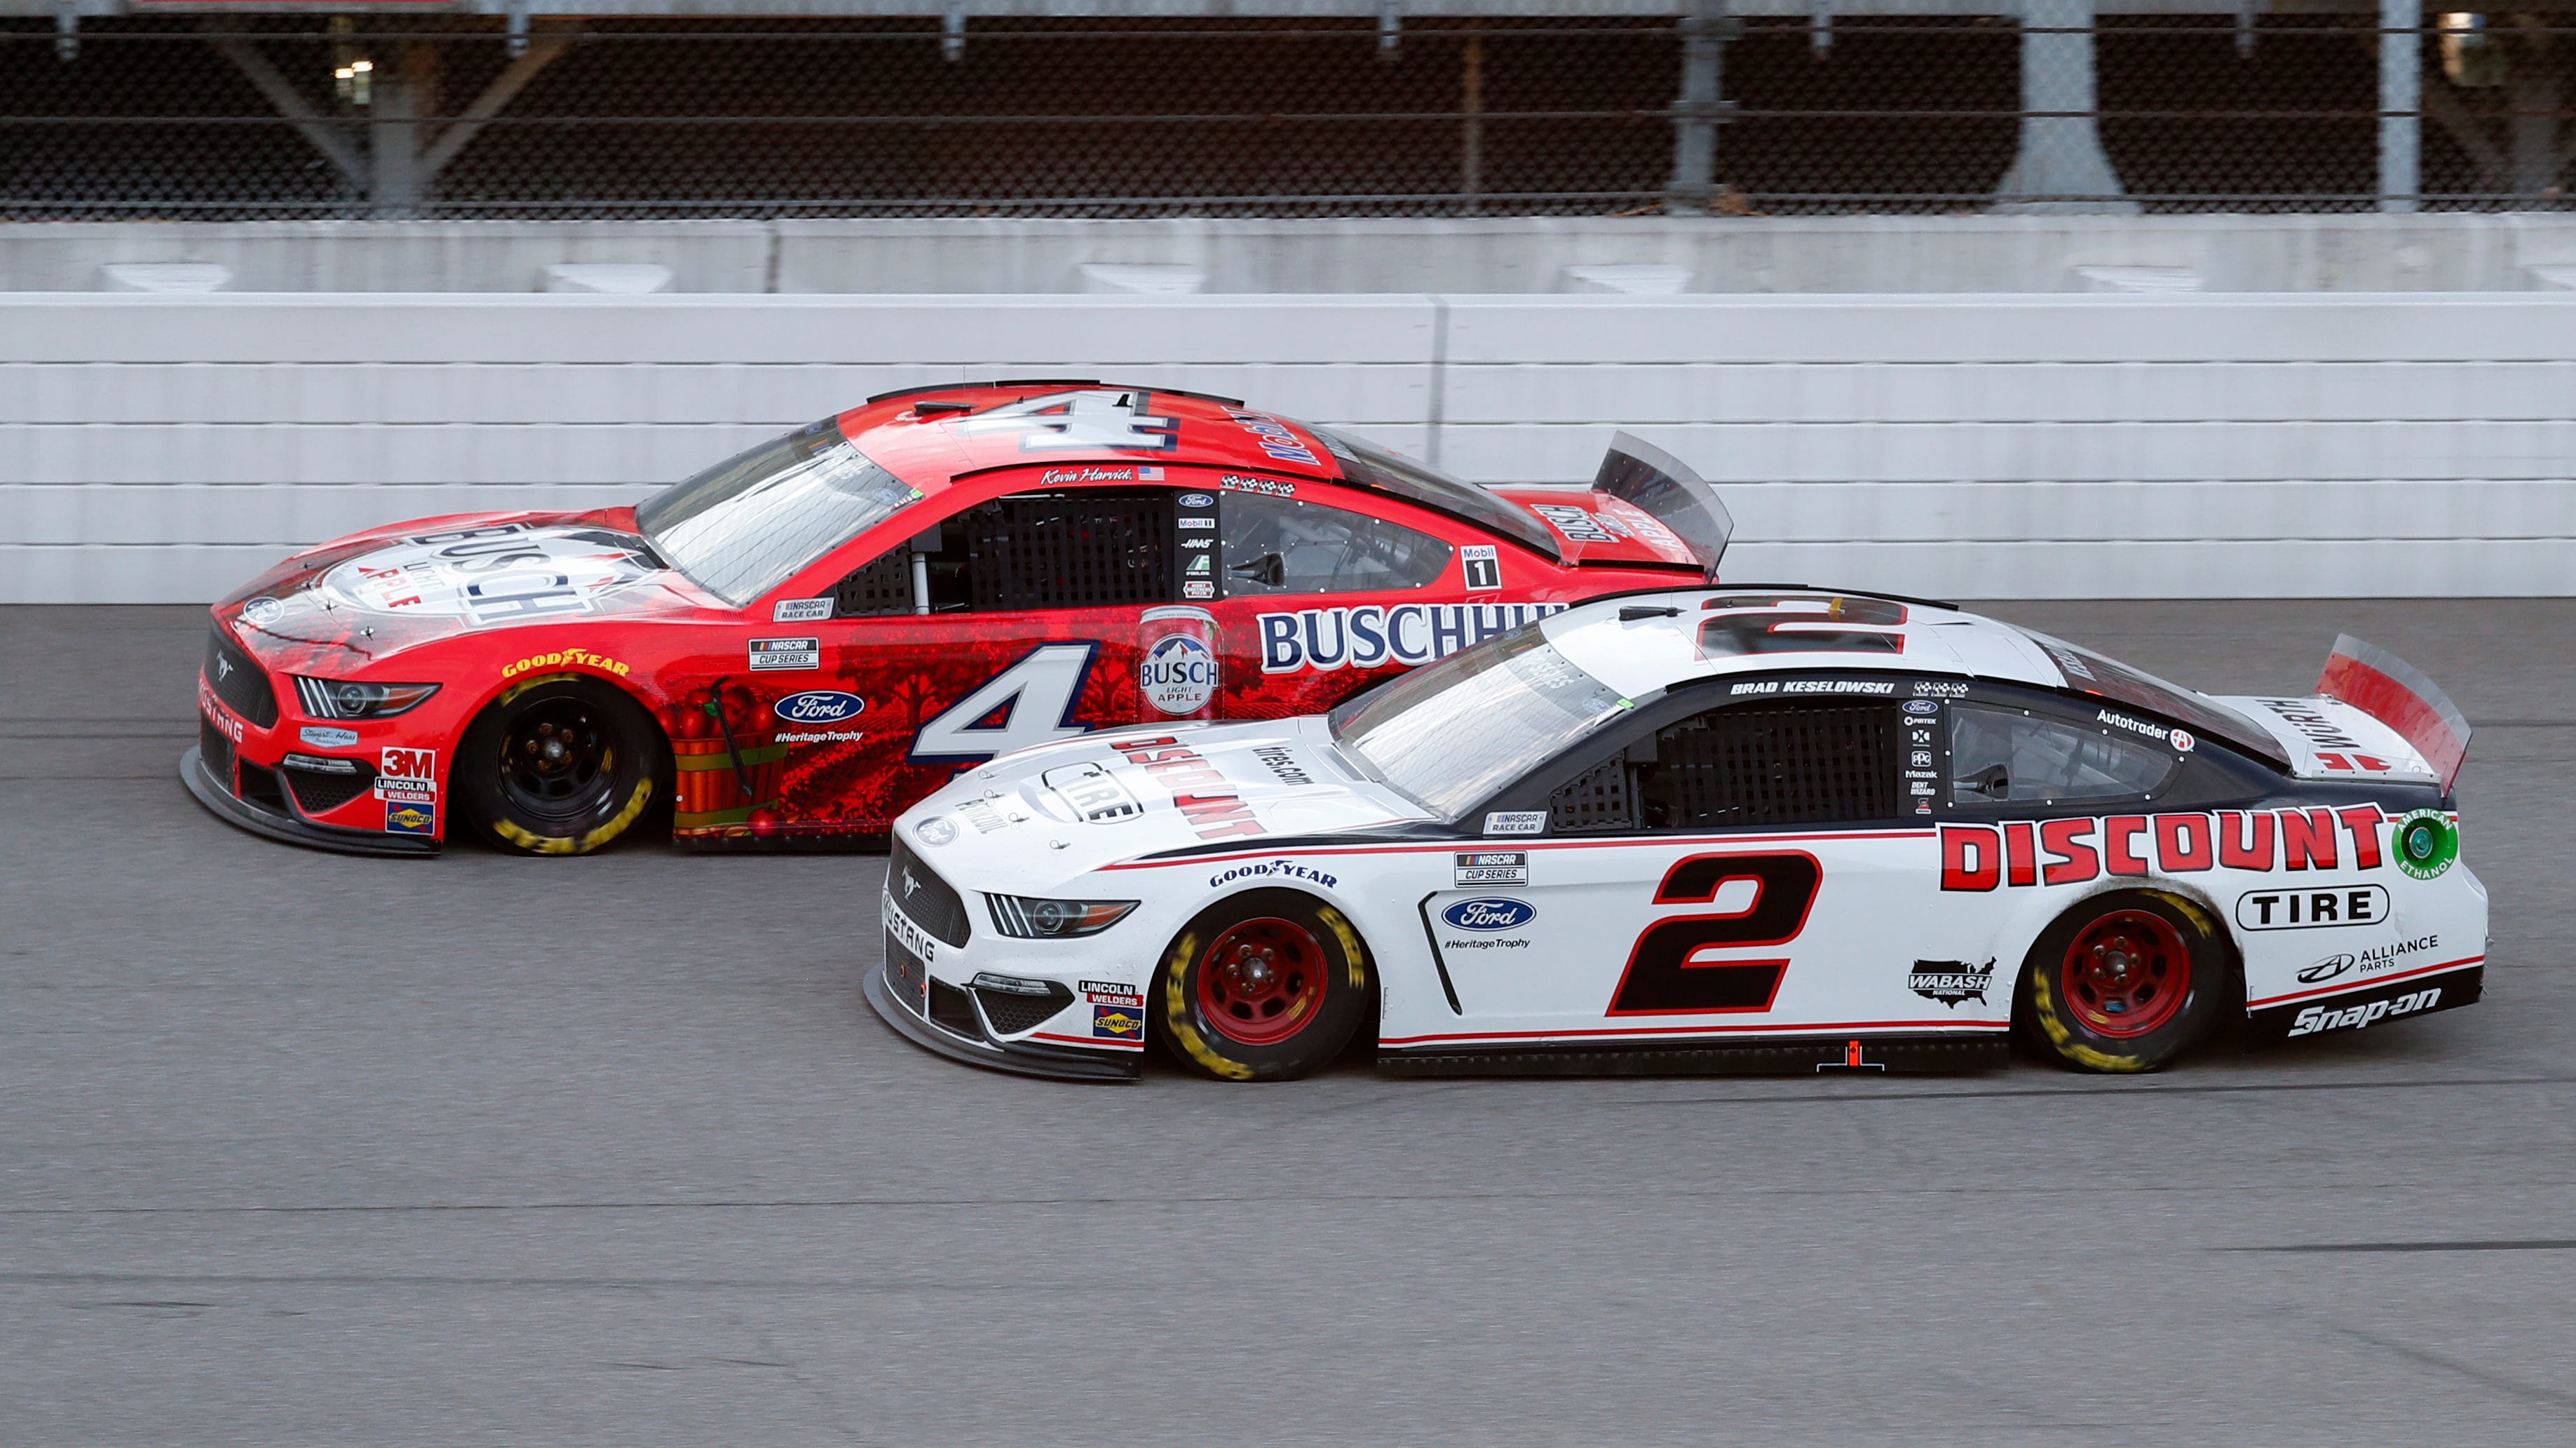 Kevin Harvick (4) competes with Brad Keselowski (2) during a NASCAR Cup Series auto race.